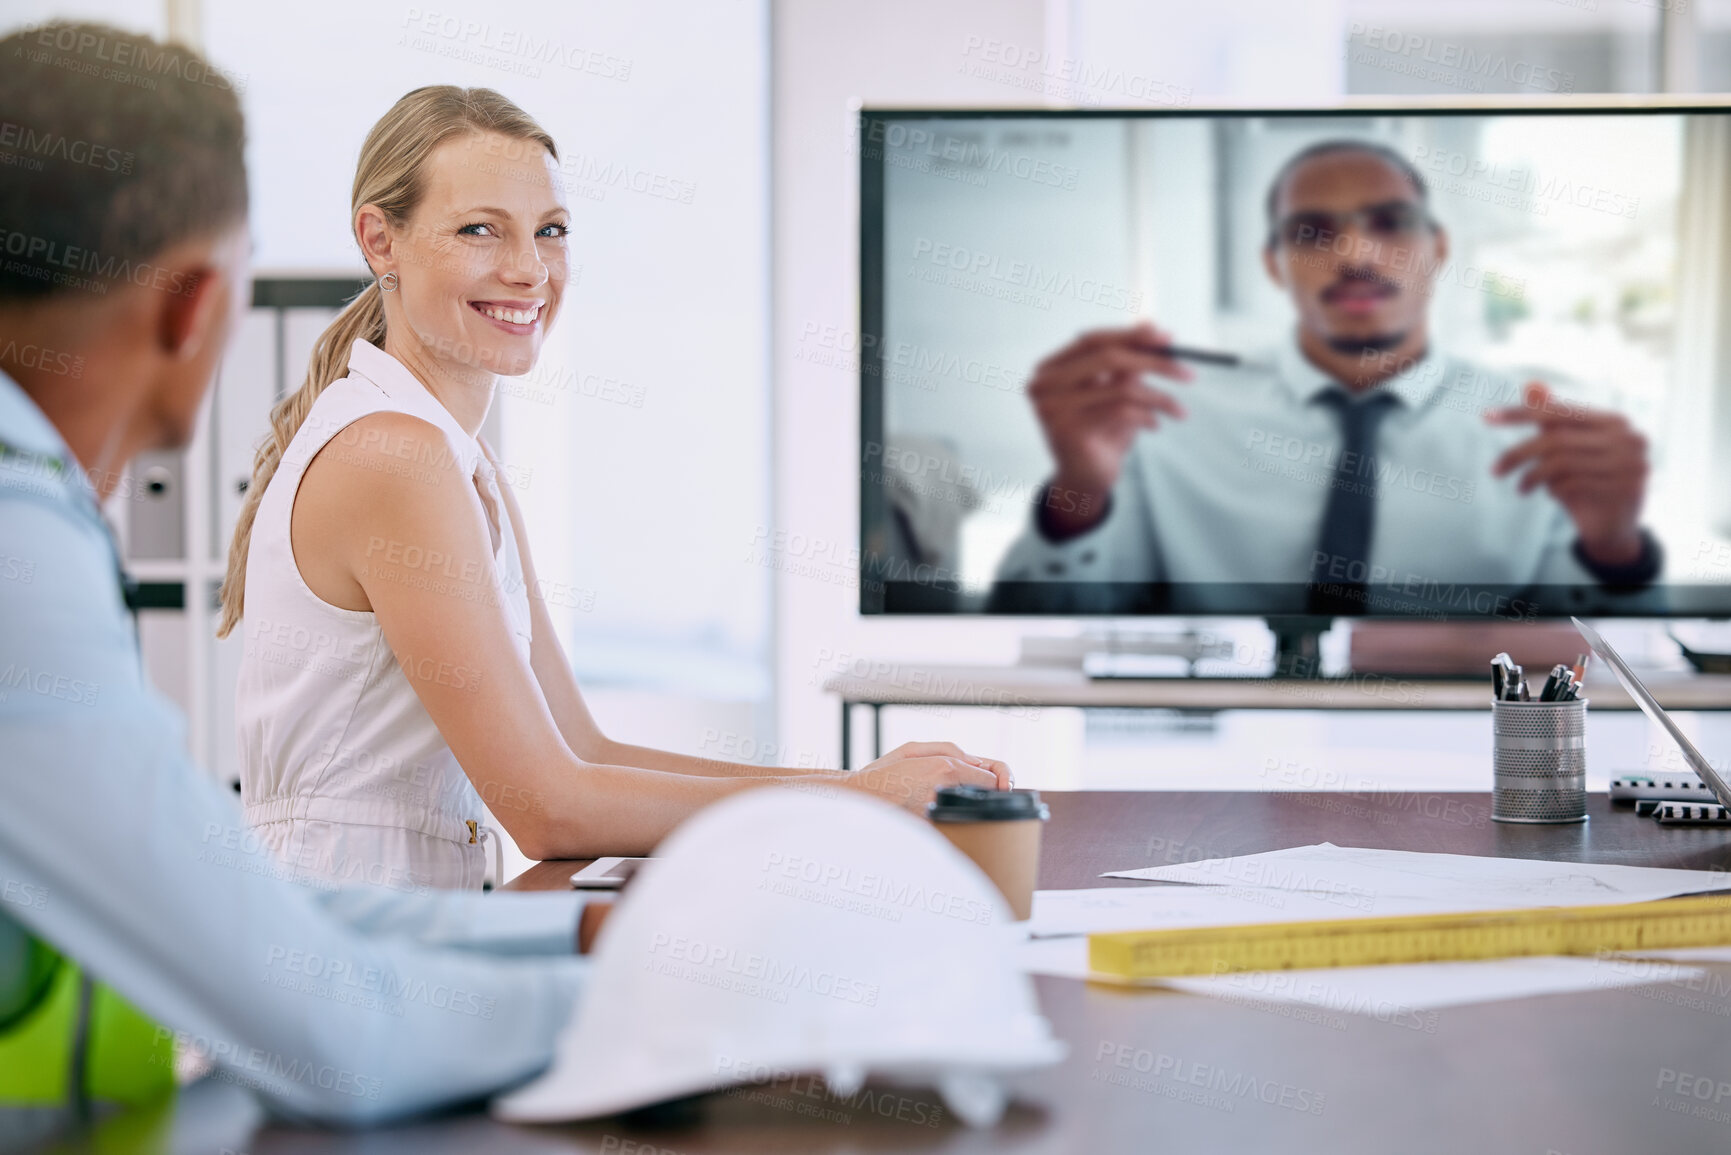 Buy stock photo Architects, engineers and employees in virtual video call in boardroom at work, woman with smile in remote seminar and meeting with management online. Portrait of worker in architecture conference